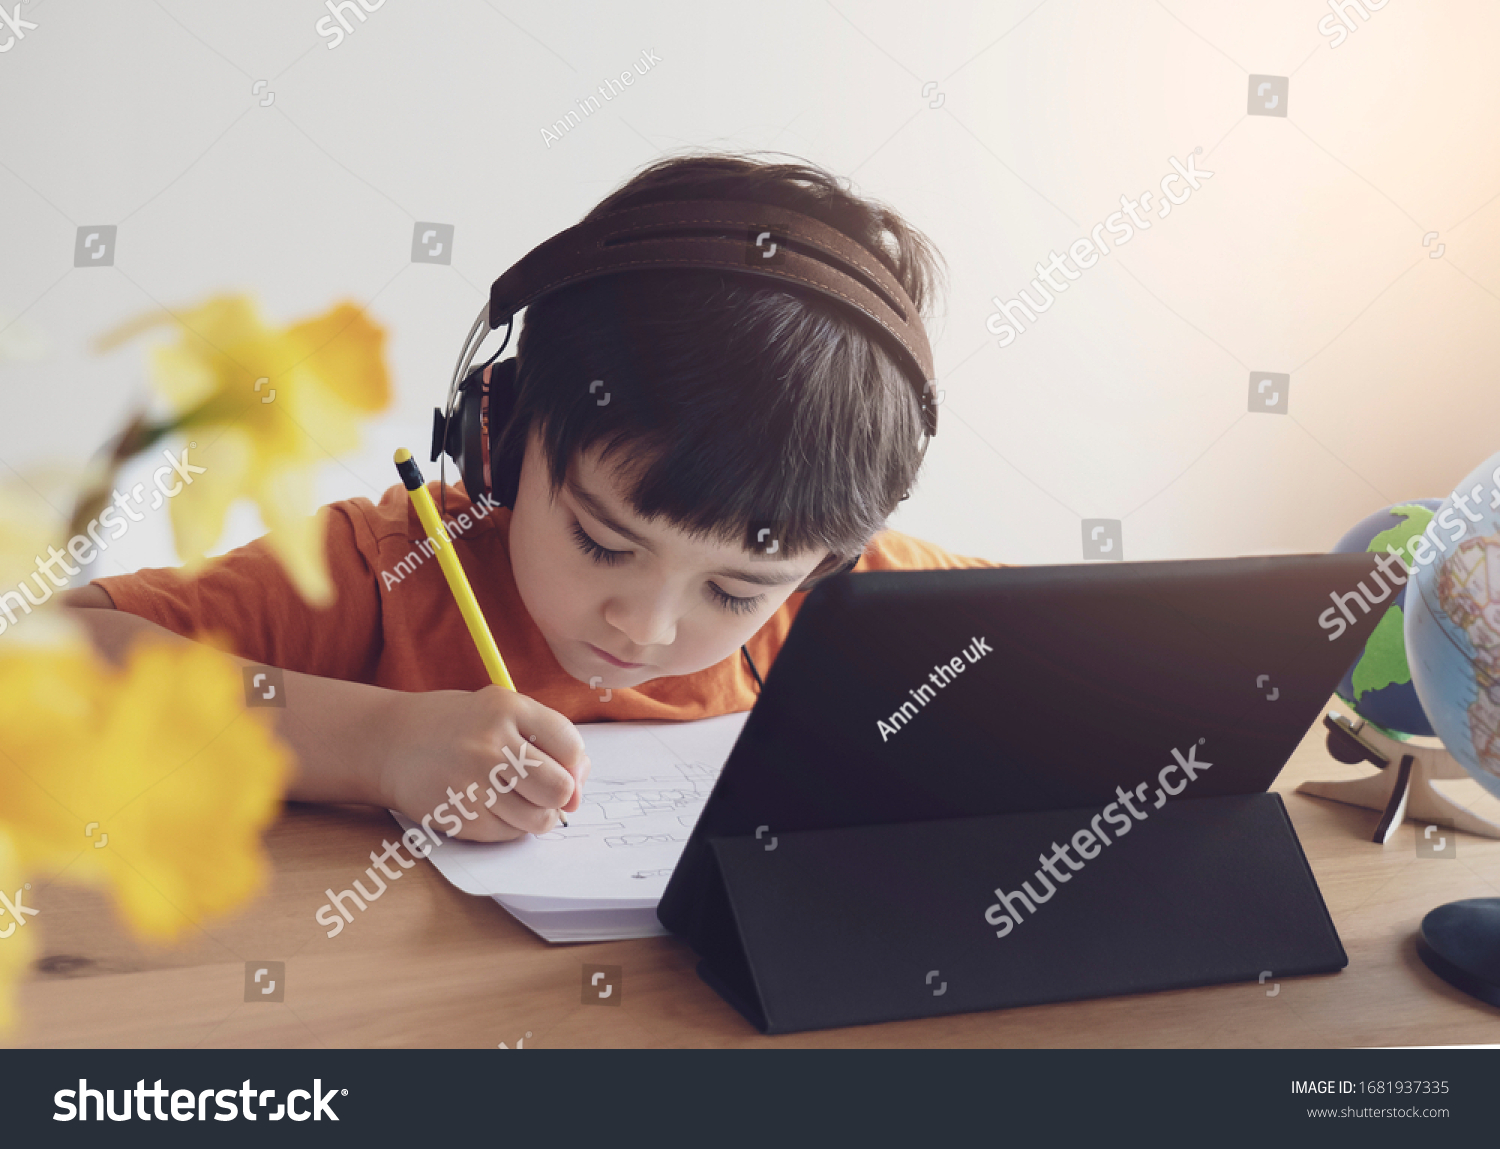 Kid self isolation using tablet for his homework,Child doing using digital tablet searching information on internet during covid 19 lock down,Home schooling,Social Distance,E-learning online education #1681937335